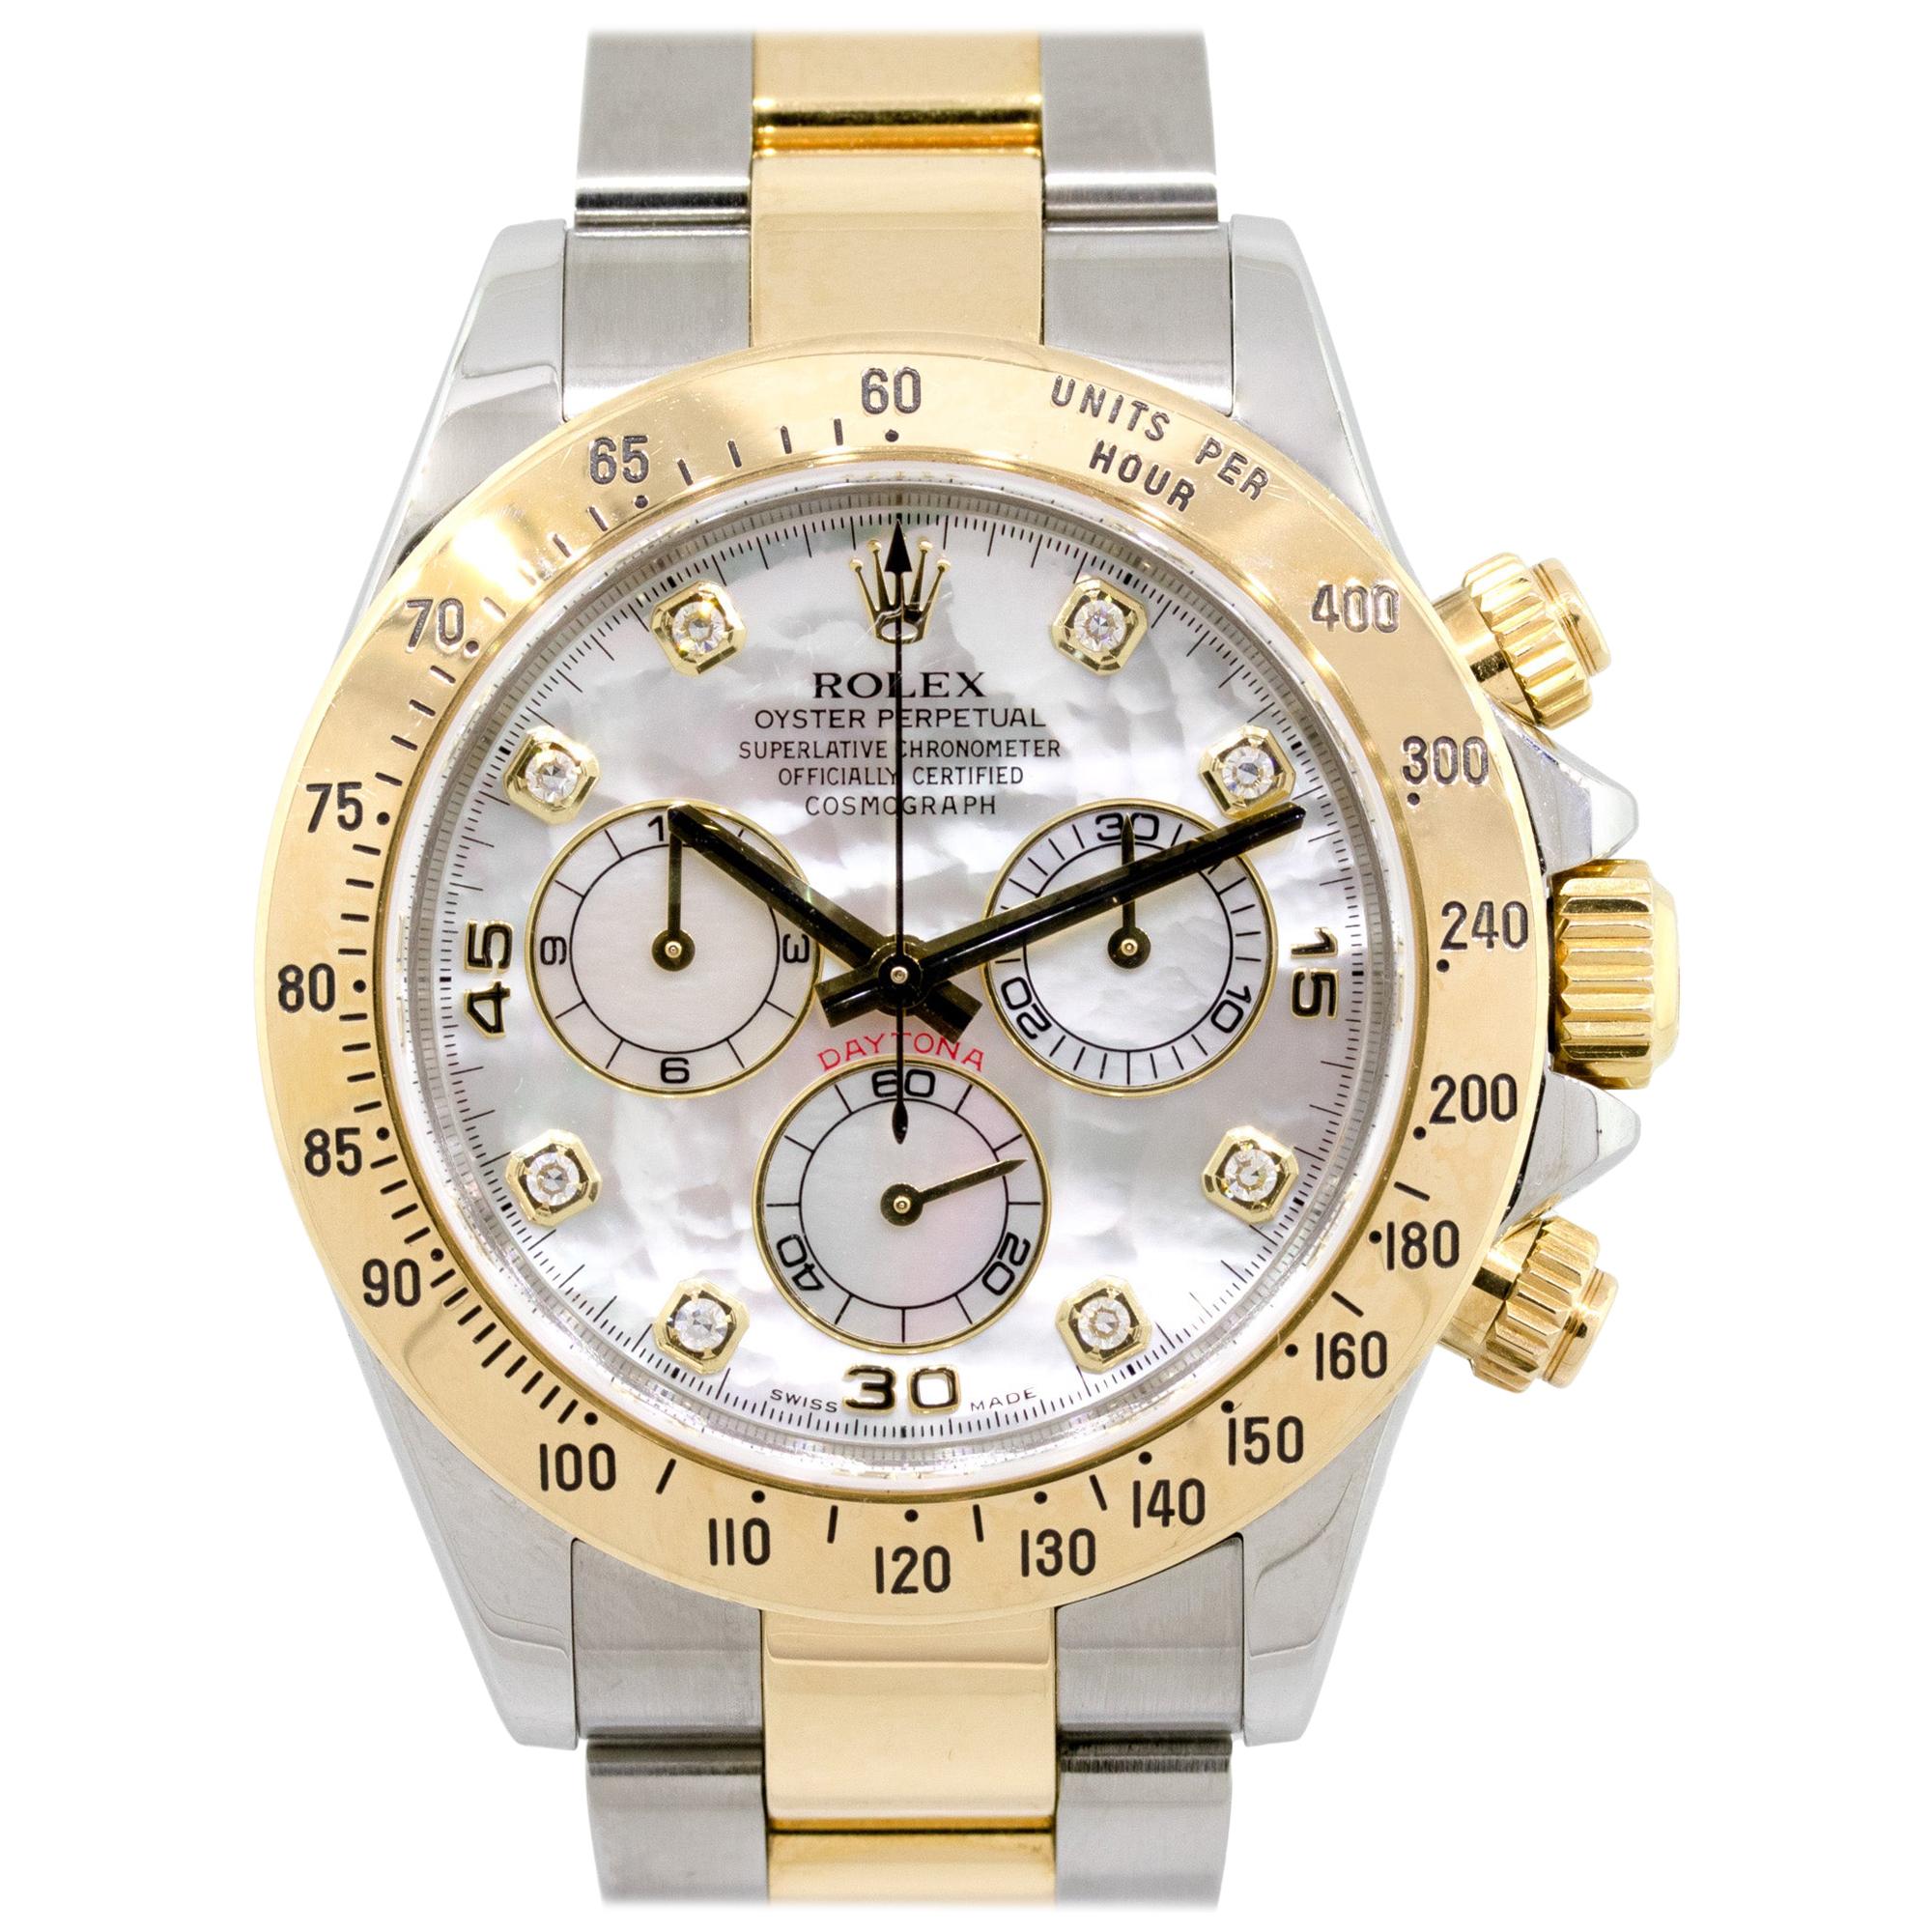 Rolex 116523 Daytona Two-Tone with Mother of Pearl Dial Watch